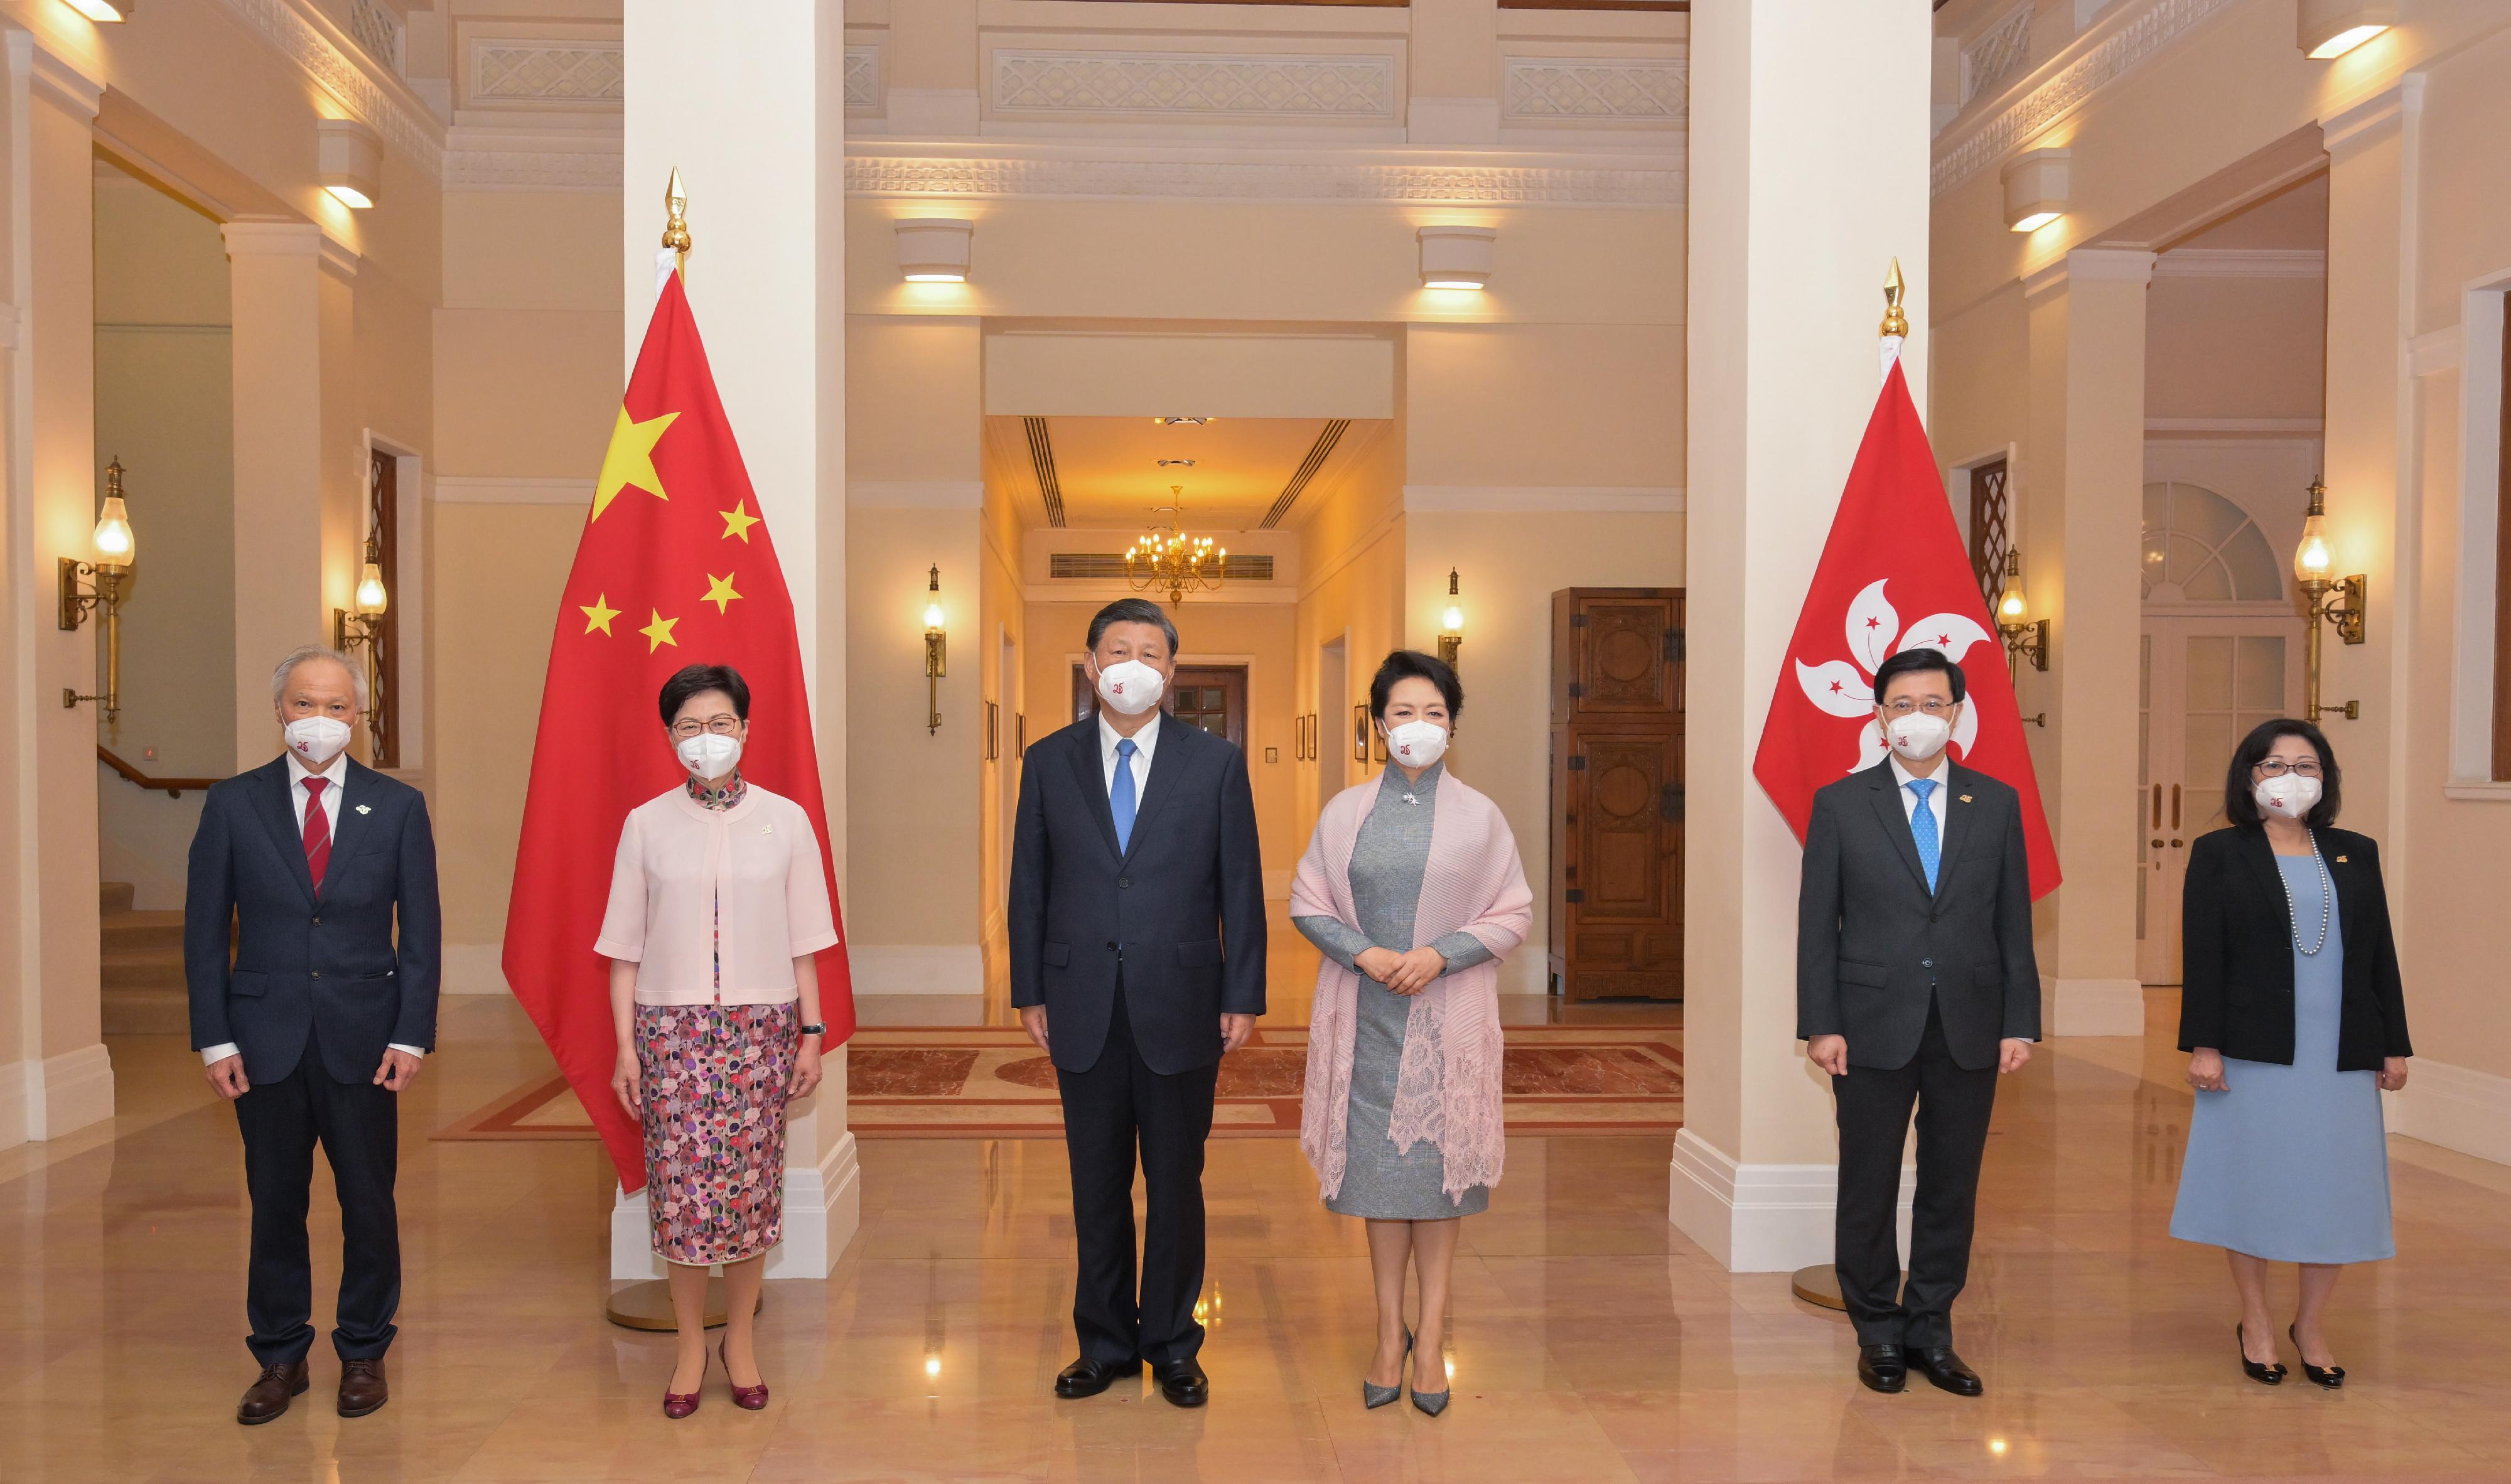 President Xi Jinping (third left) and his wife Peng Liyuan (third right) are pictured before dinner at Government House today (June 30) with the Chief Executive, Mrs Carrie Lam (second left) and her husband Mr Lam Siu-por (first left), as well as the Chief Executive-elect, Mr John Lee (second right) and his wife Mrs Janet Lee (first right).